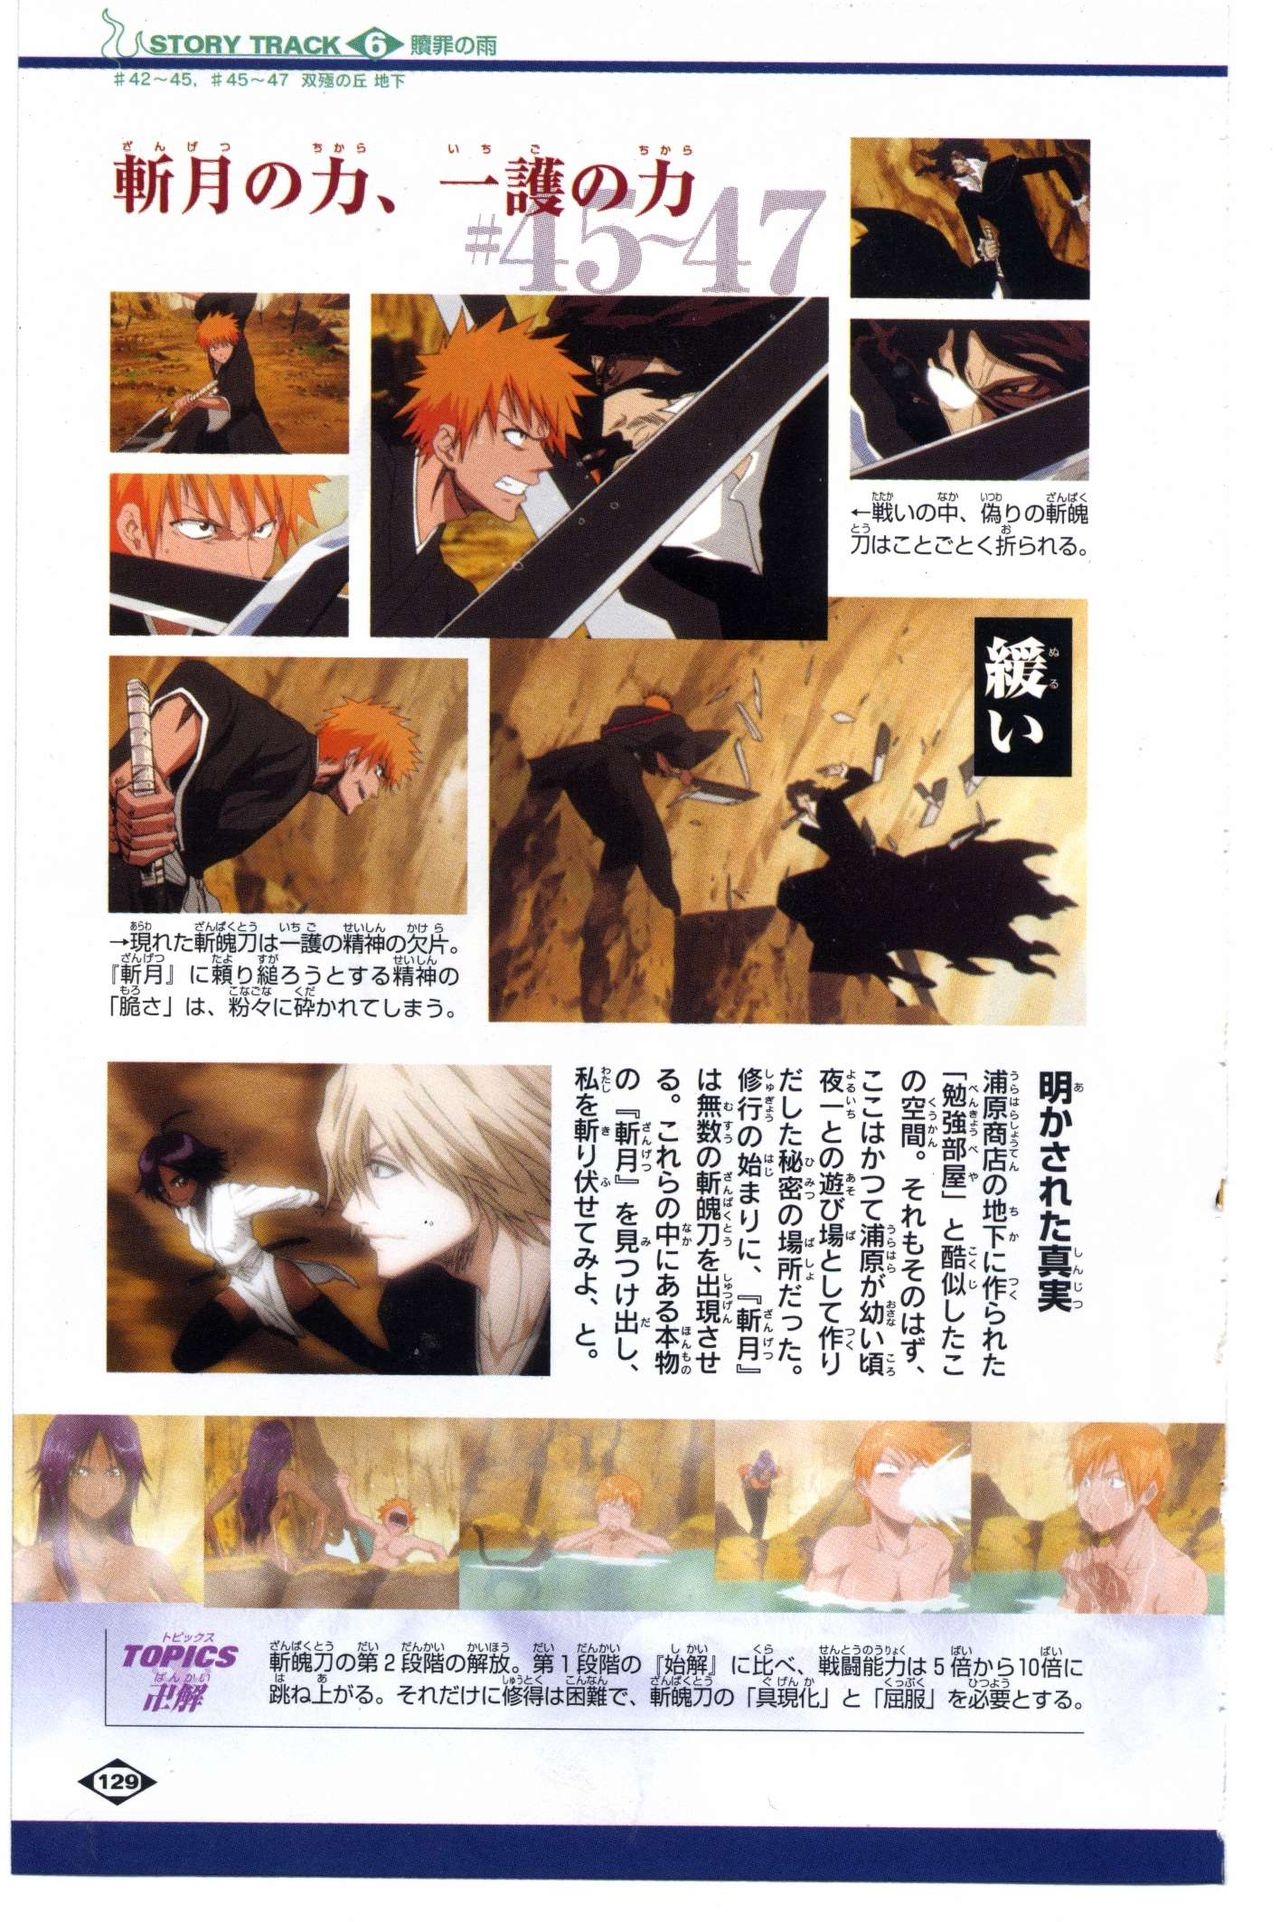 Bleach: Official Animation Book VIBEs 129